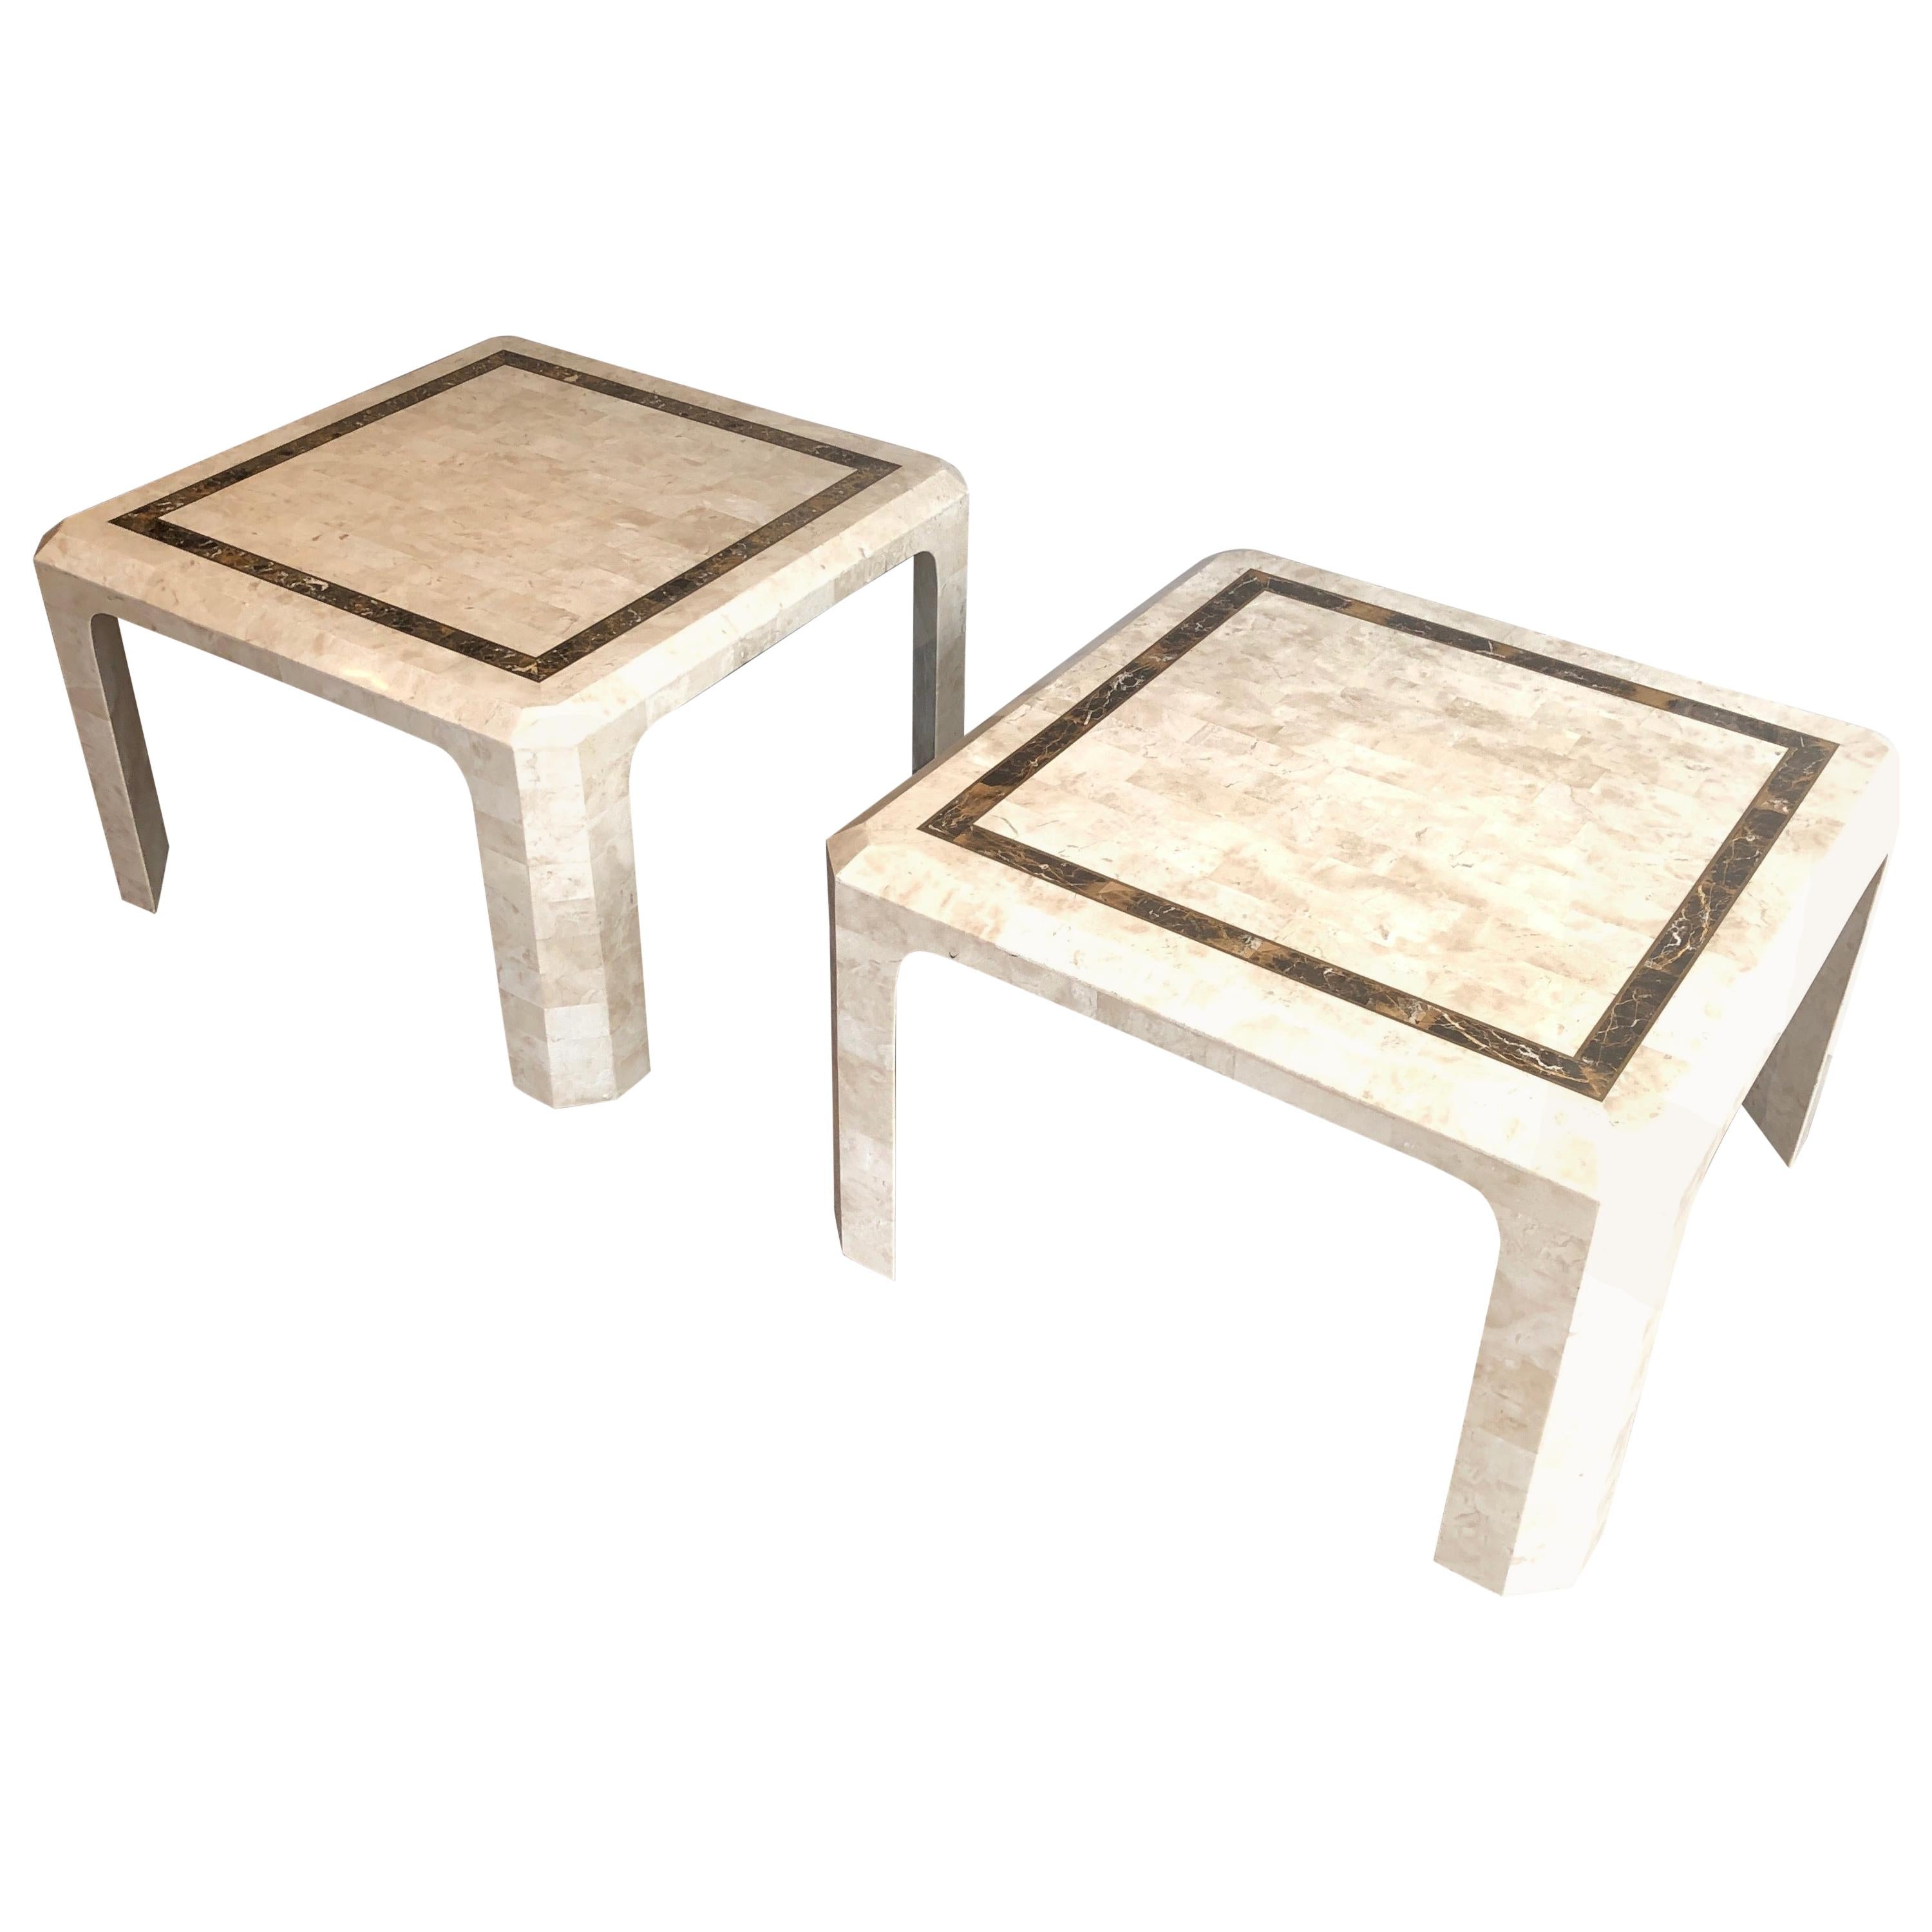 Pair of Marble Plates Side Tables with a Brass Line, French, Circa 1970